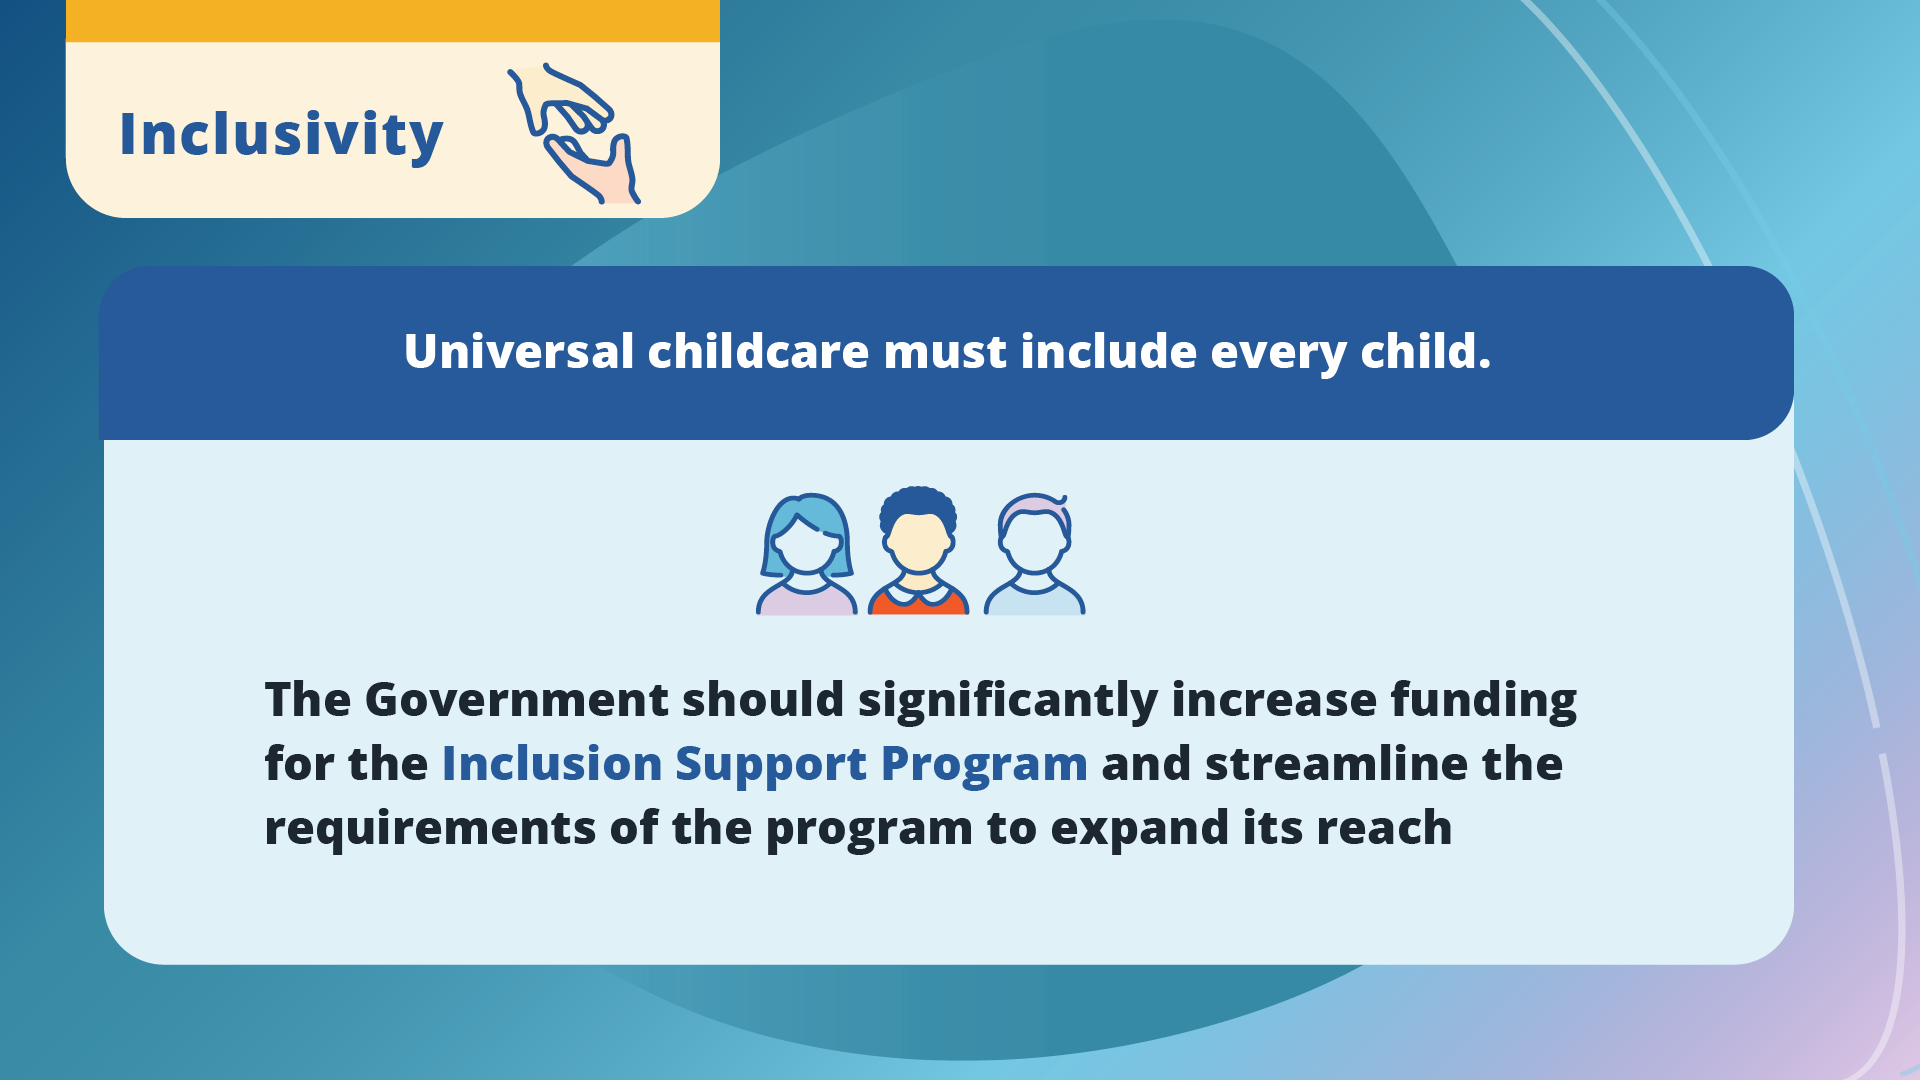 Inclusivity. Universal childcare must include every child. The Government should significantly increase funding for the Inclusion Support Program and streamline the requirements of the program to expand its reach.